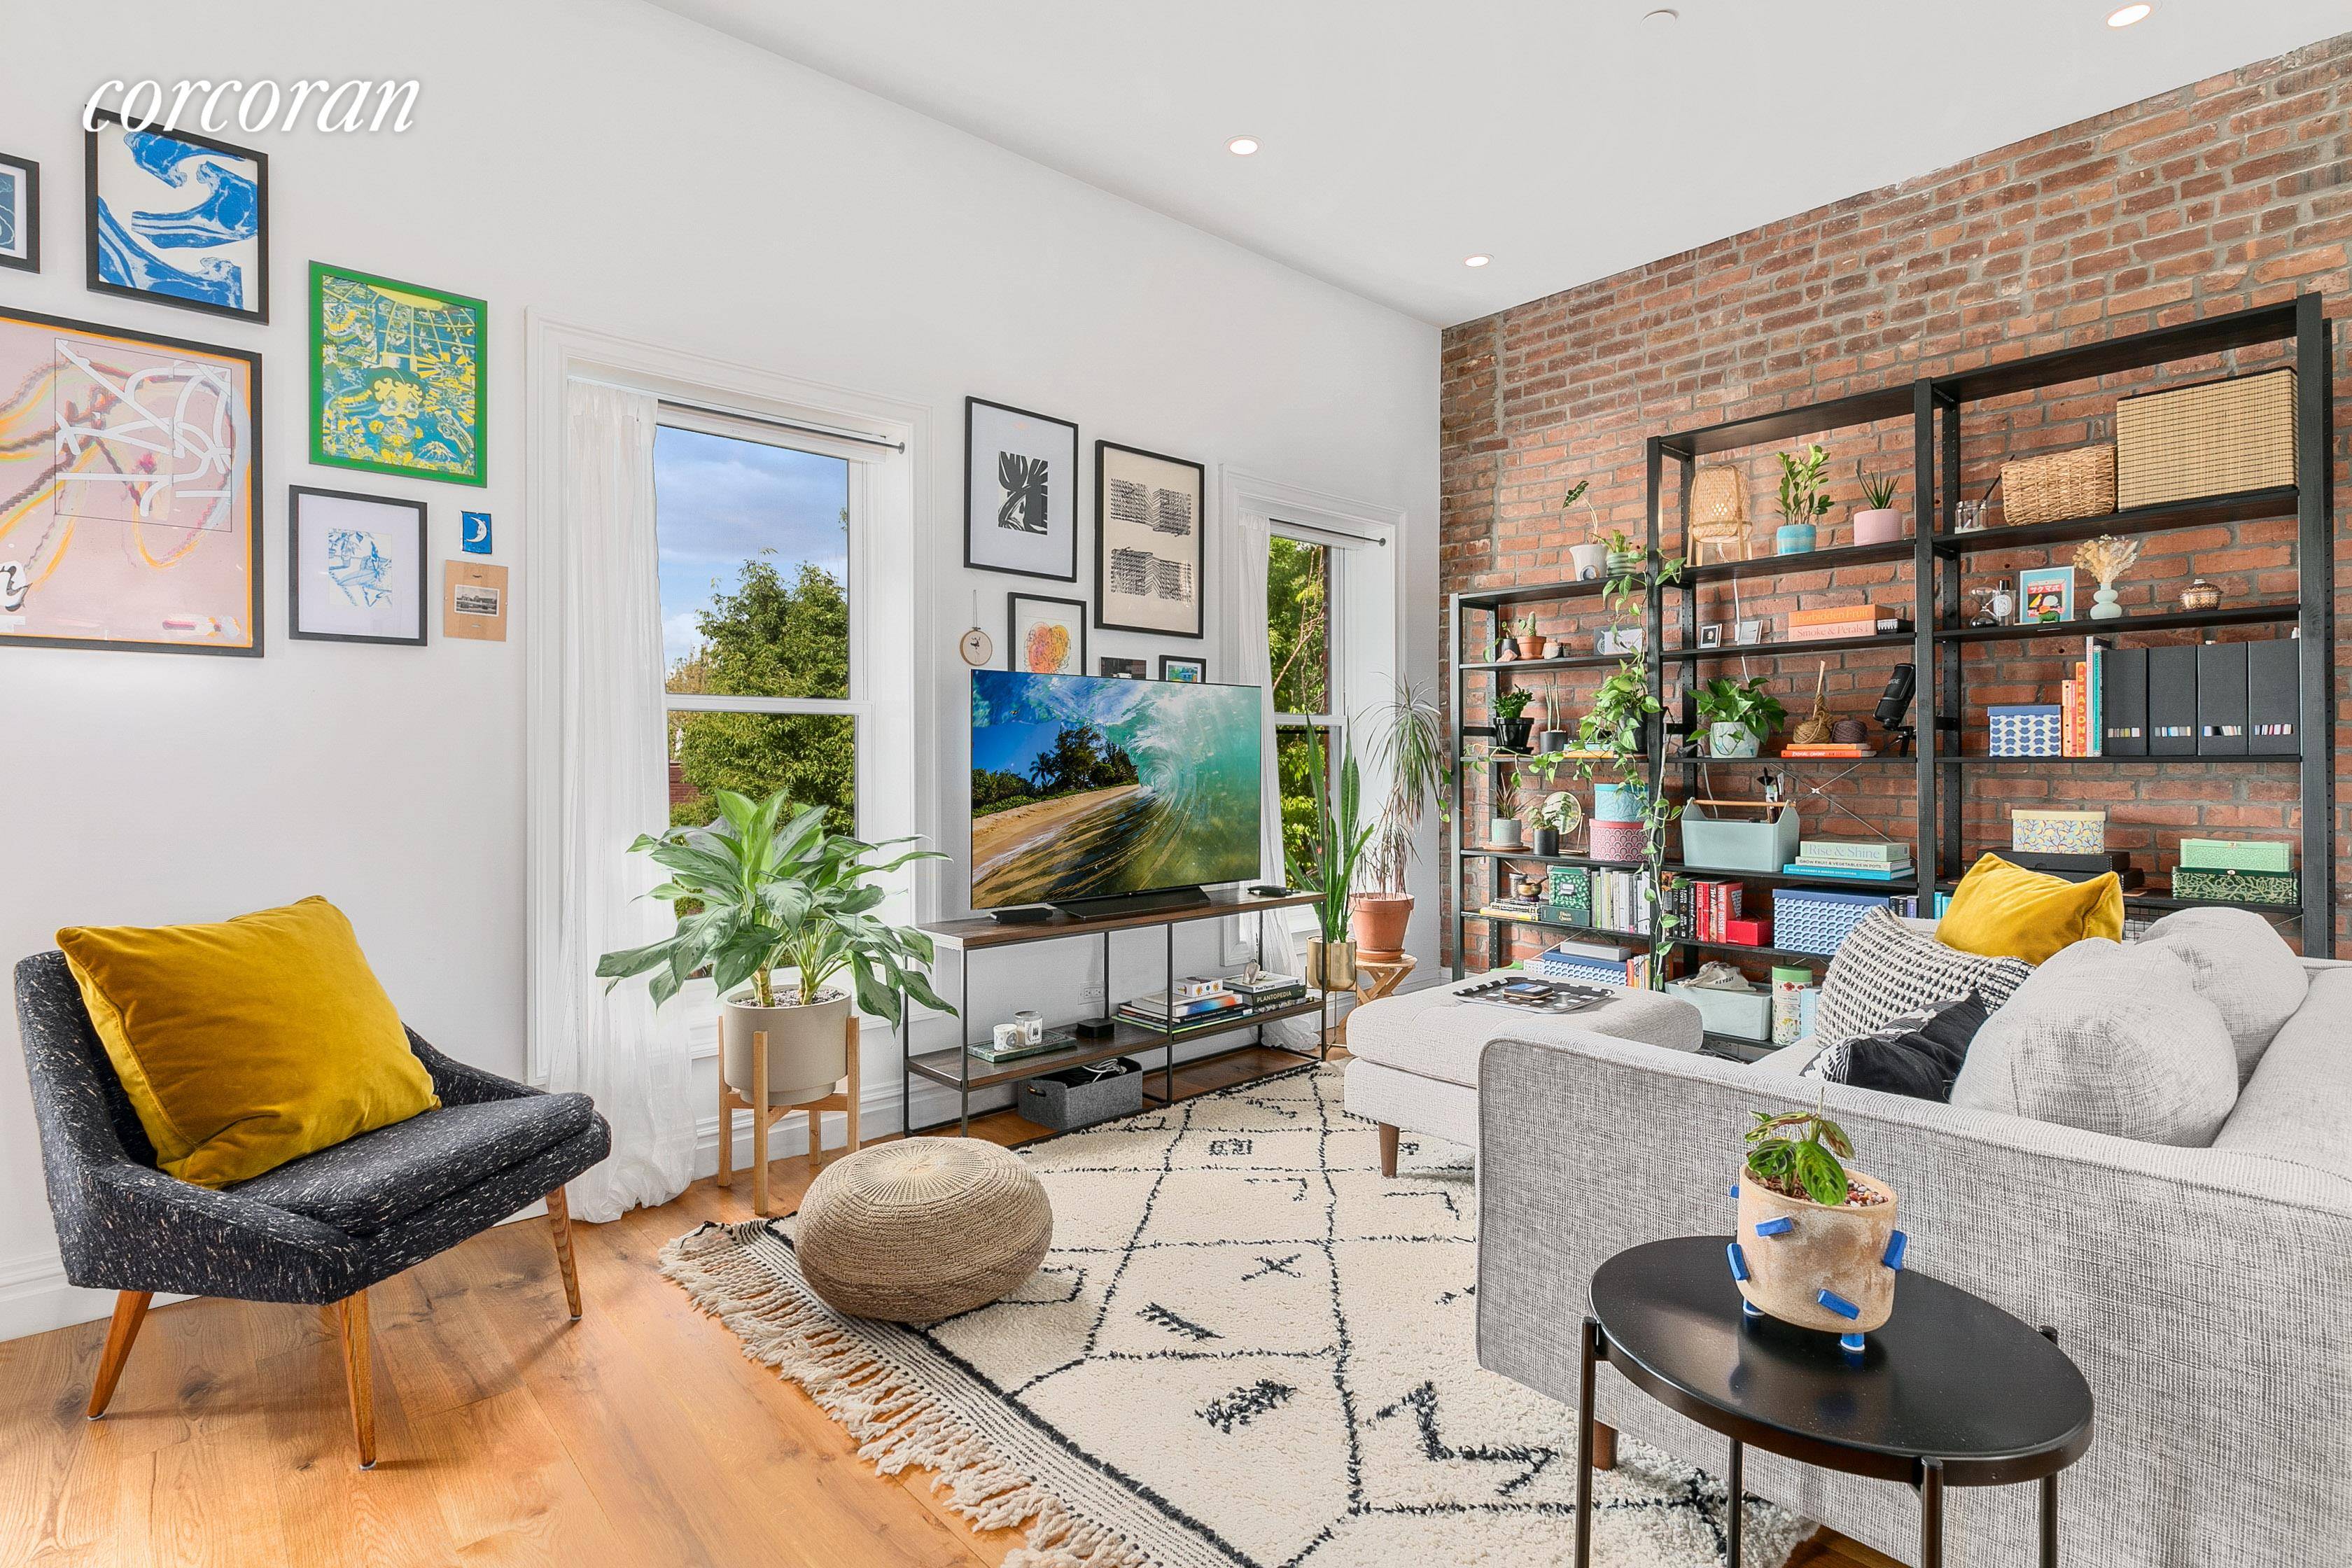 In the heart of Carroll Gardens this bright and spacious, newly renovated two bedroom, two bath home features an open concept living plan with TWO PRIVATE OUTDOOR SPACES !